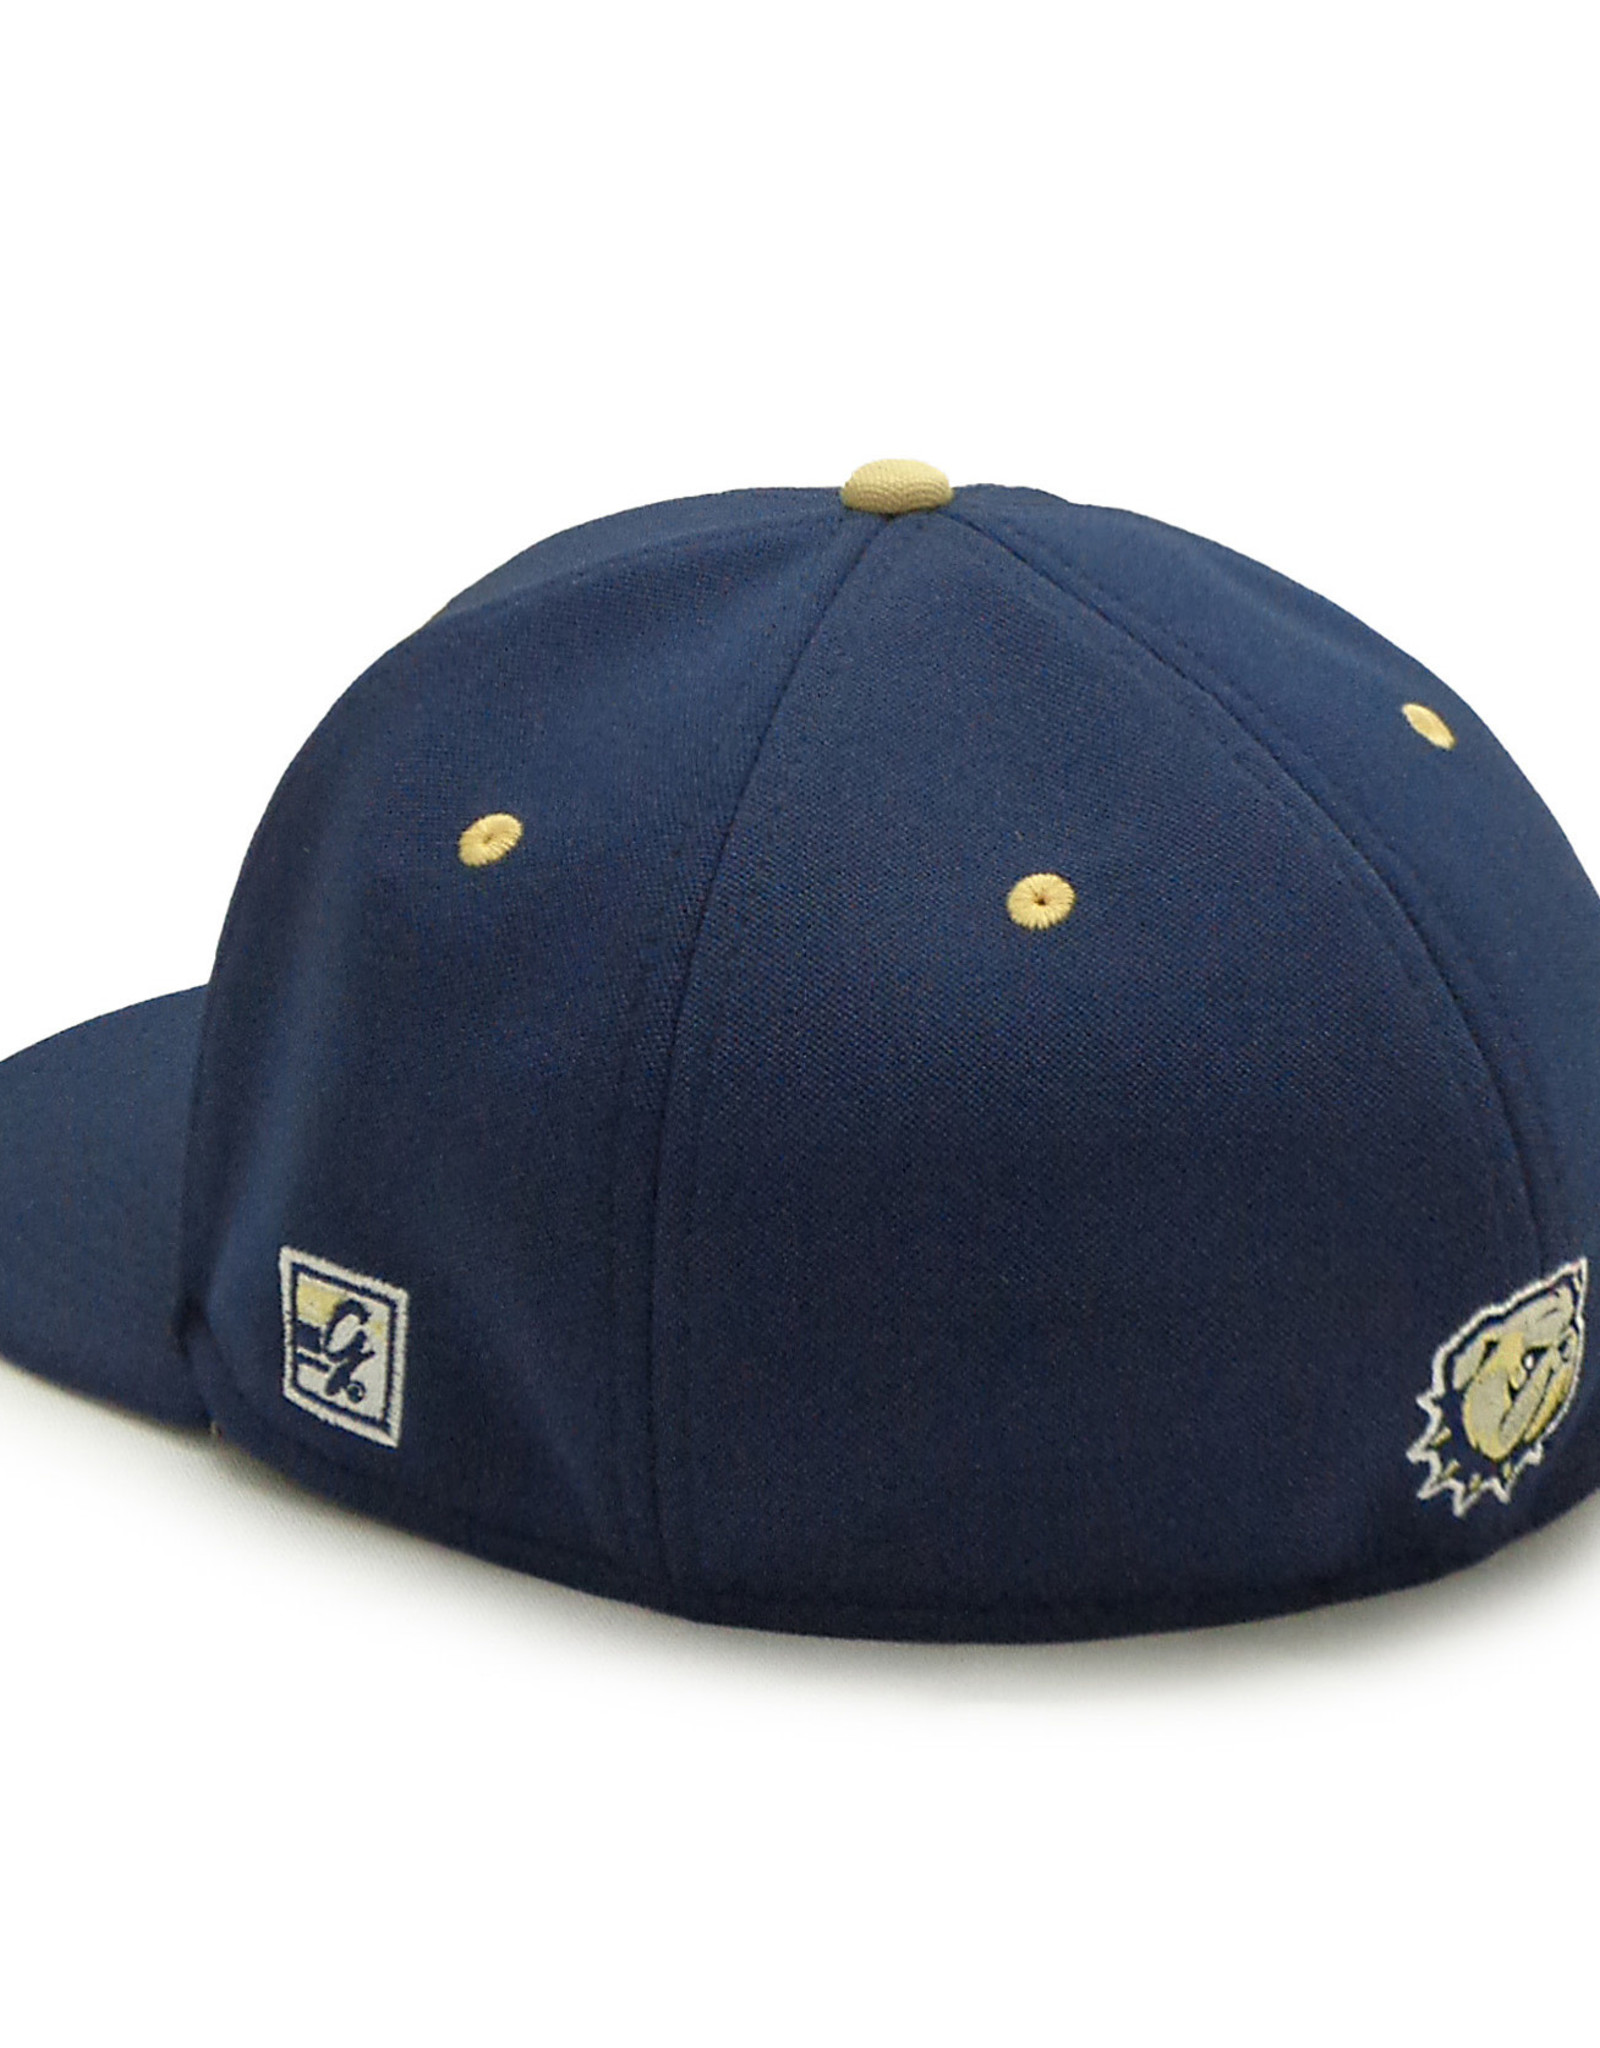 The Game Navy W Flat Bill White W Structured Stretch Fit Hat